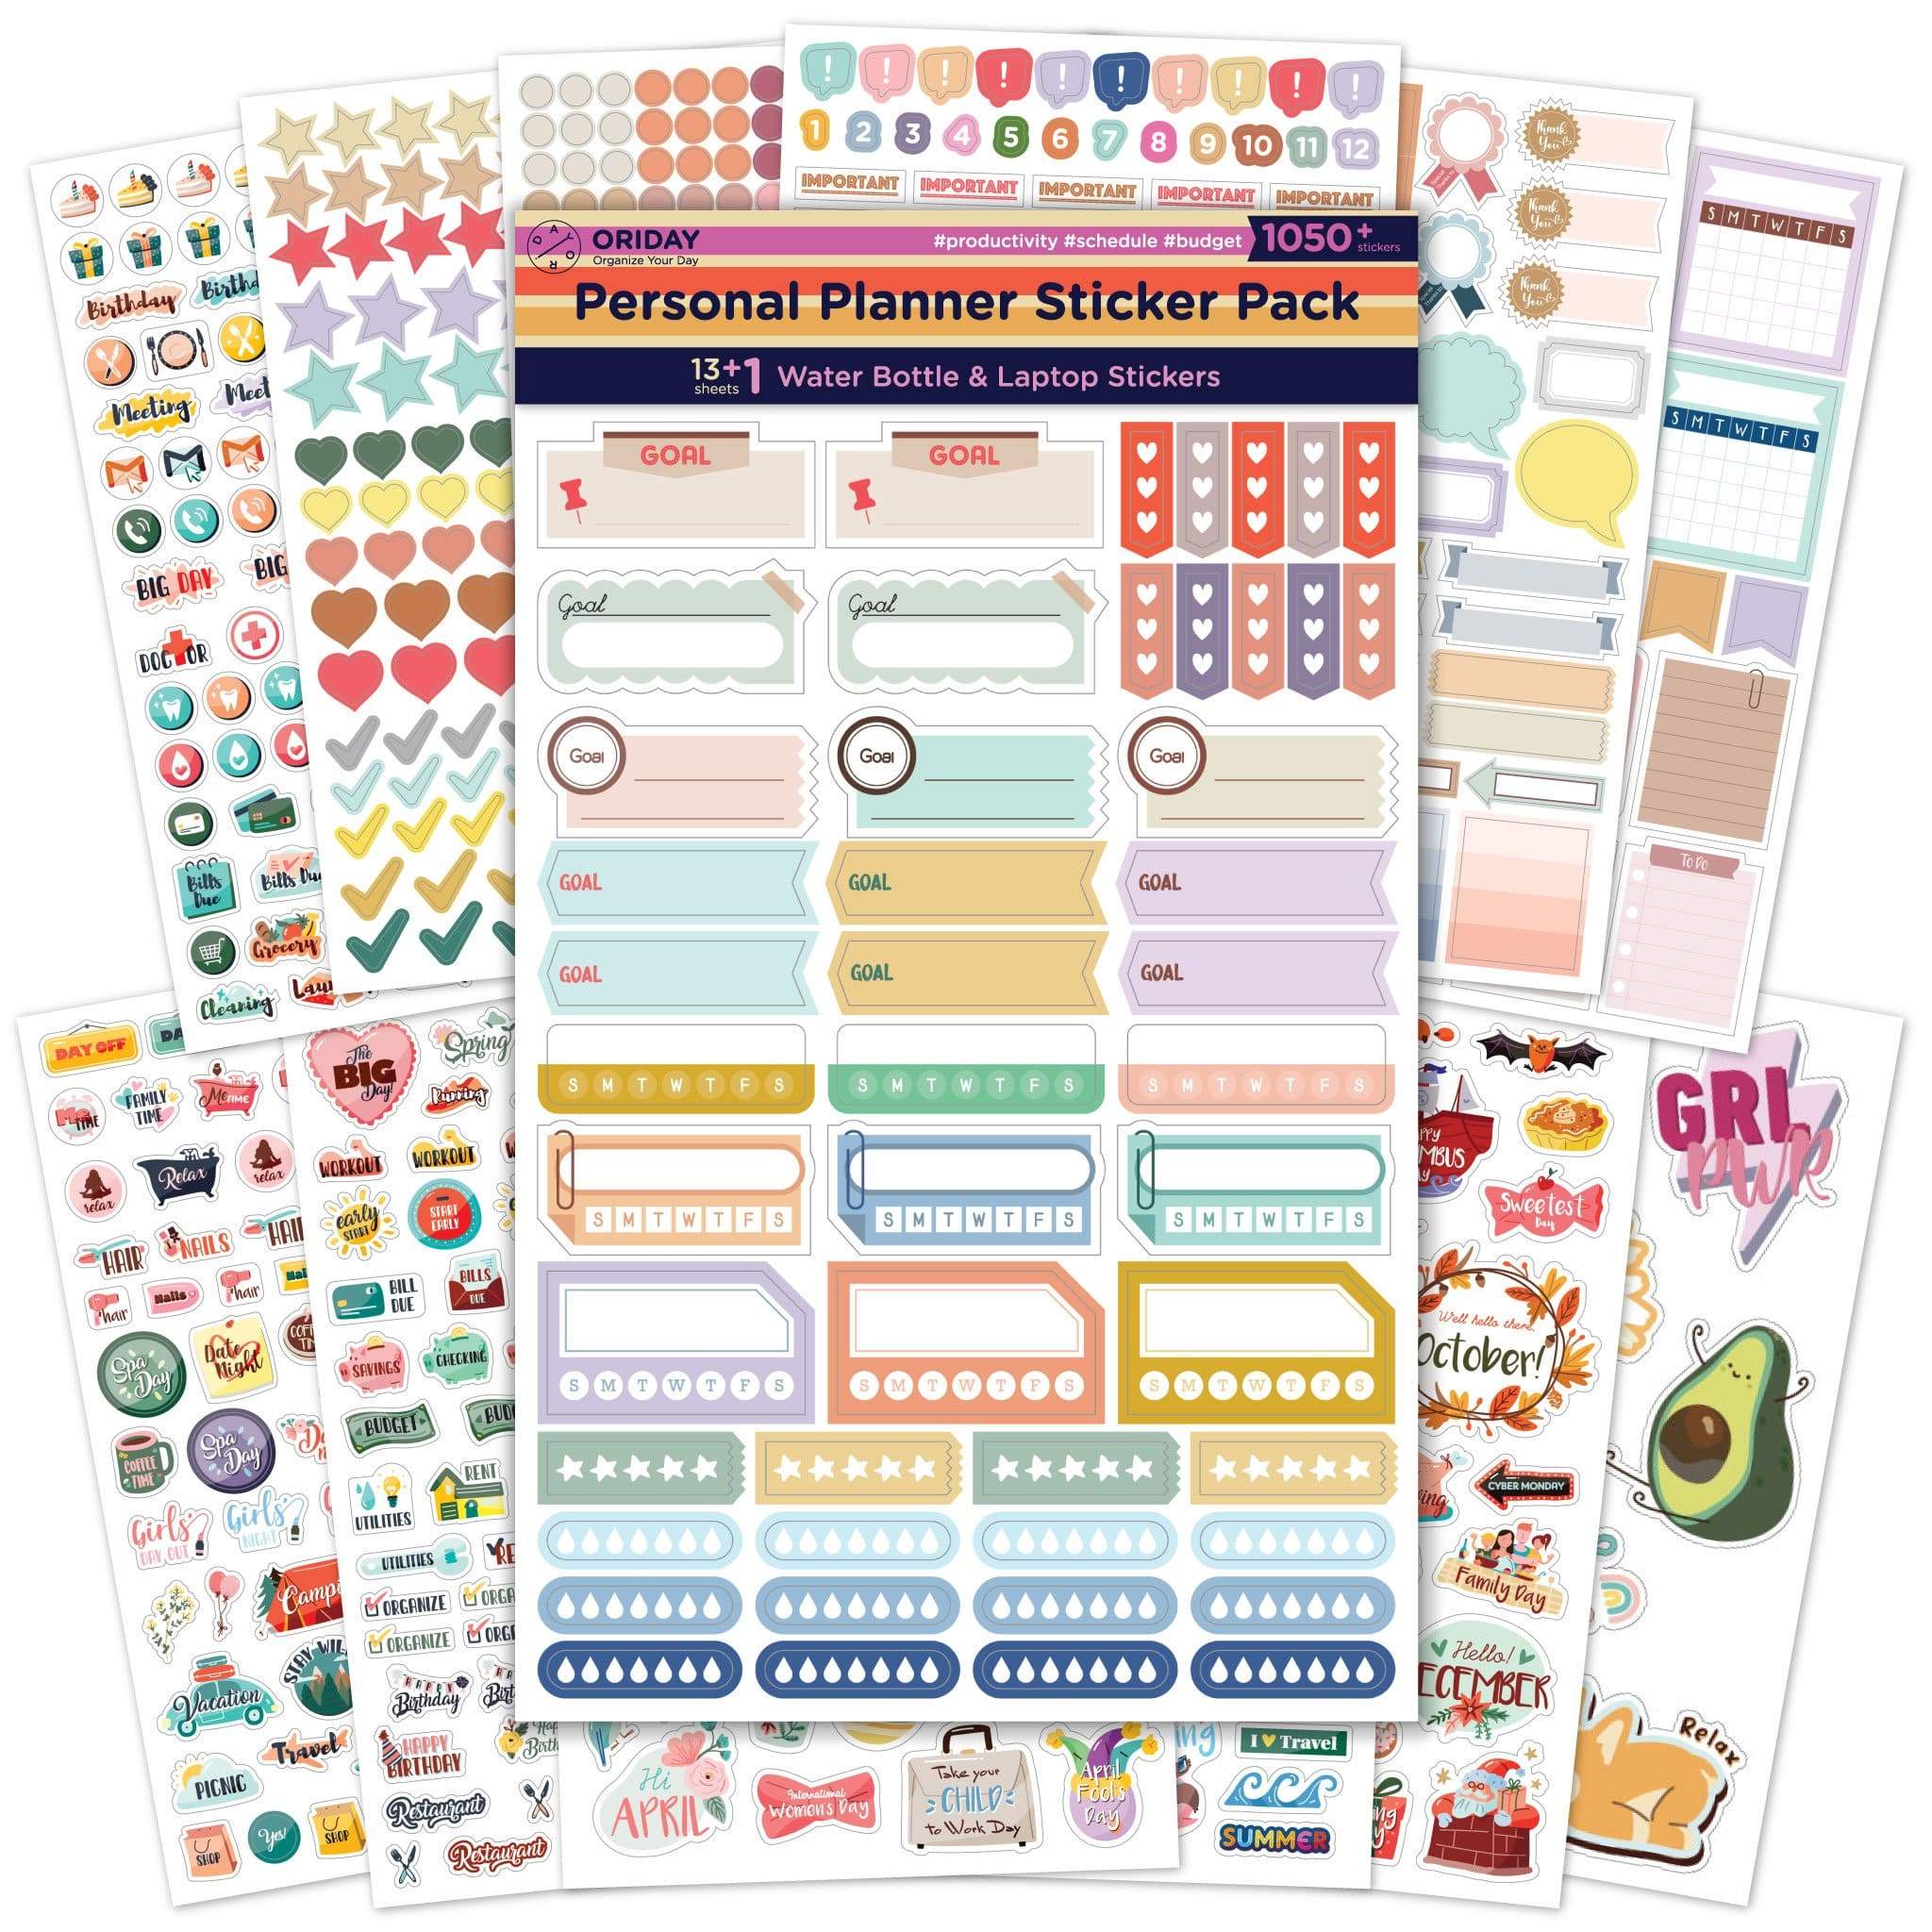 o' lolly day] O,LD! Calendar stickers - object online